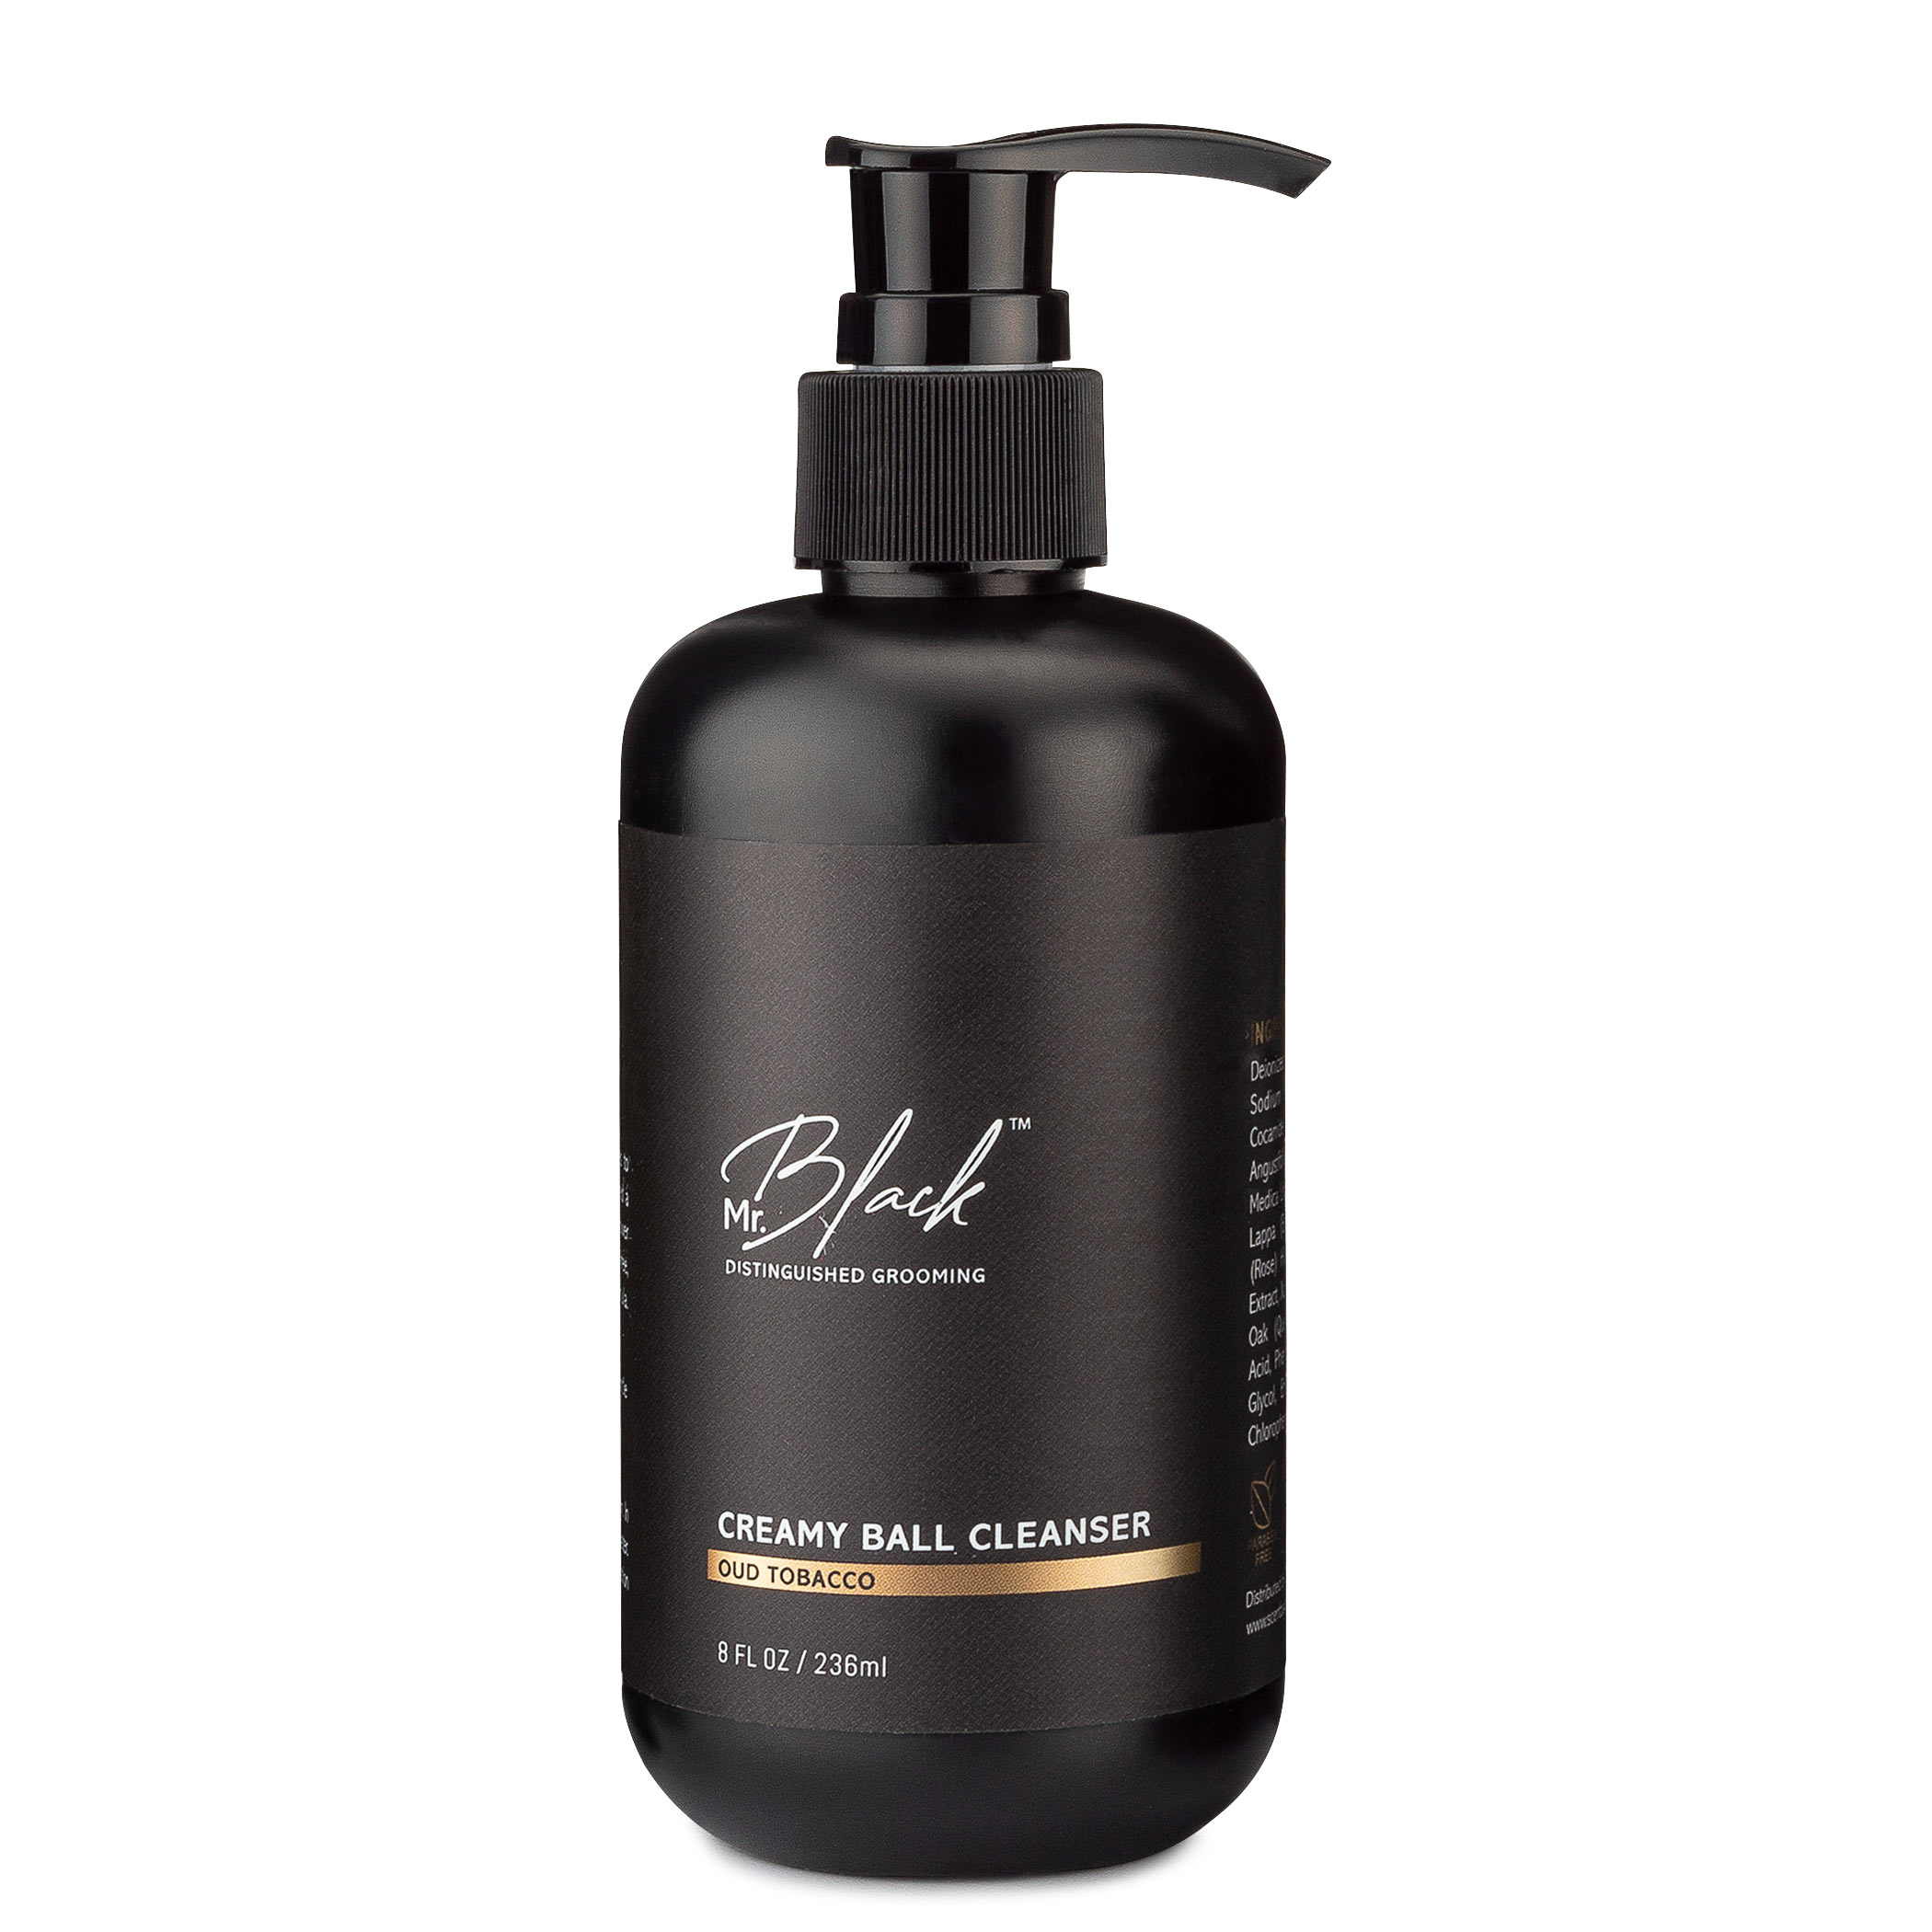 Creamy Ball Cleanser - Oud Tobacco Mr. Black Image